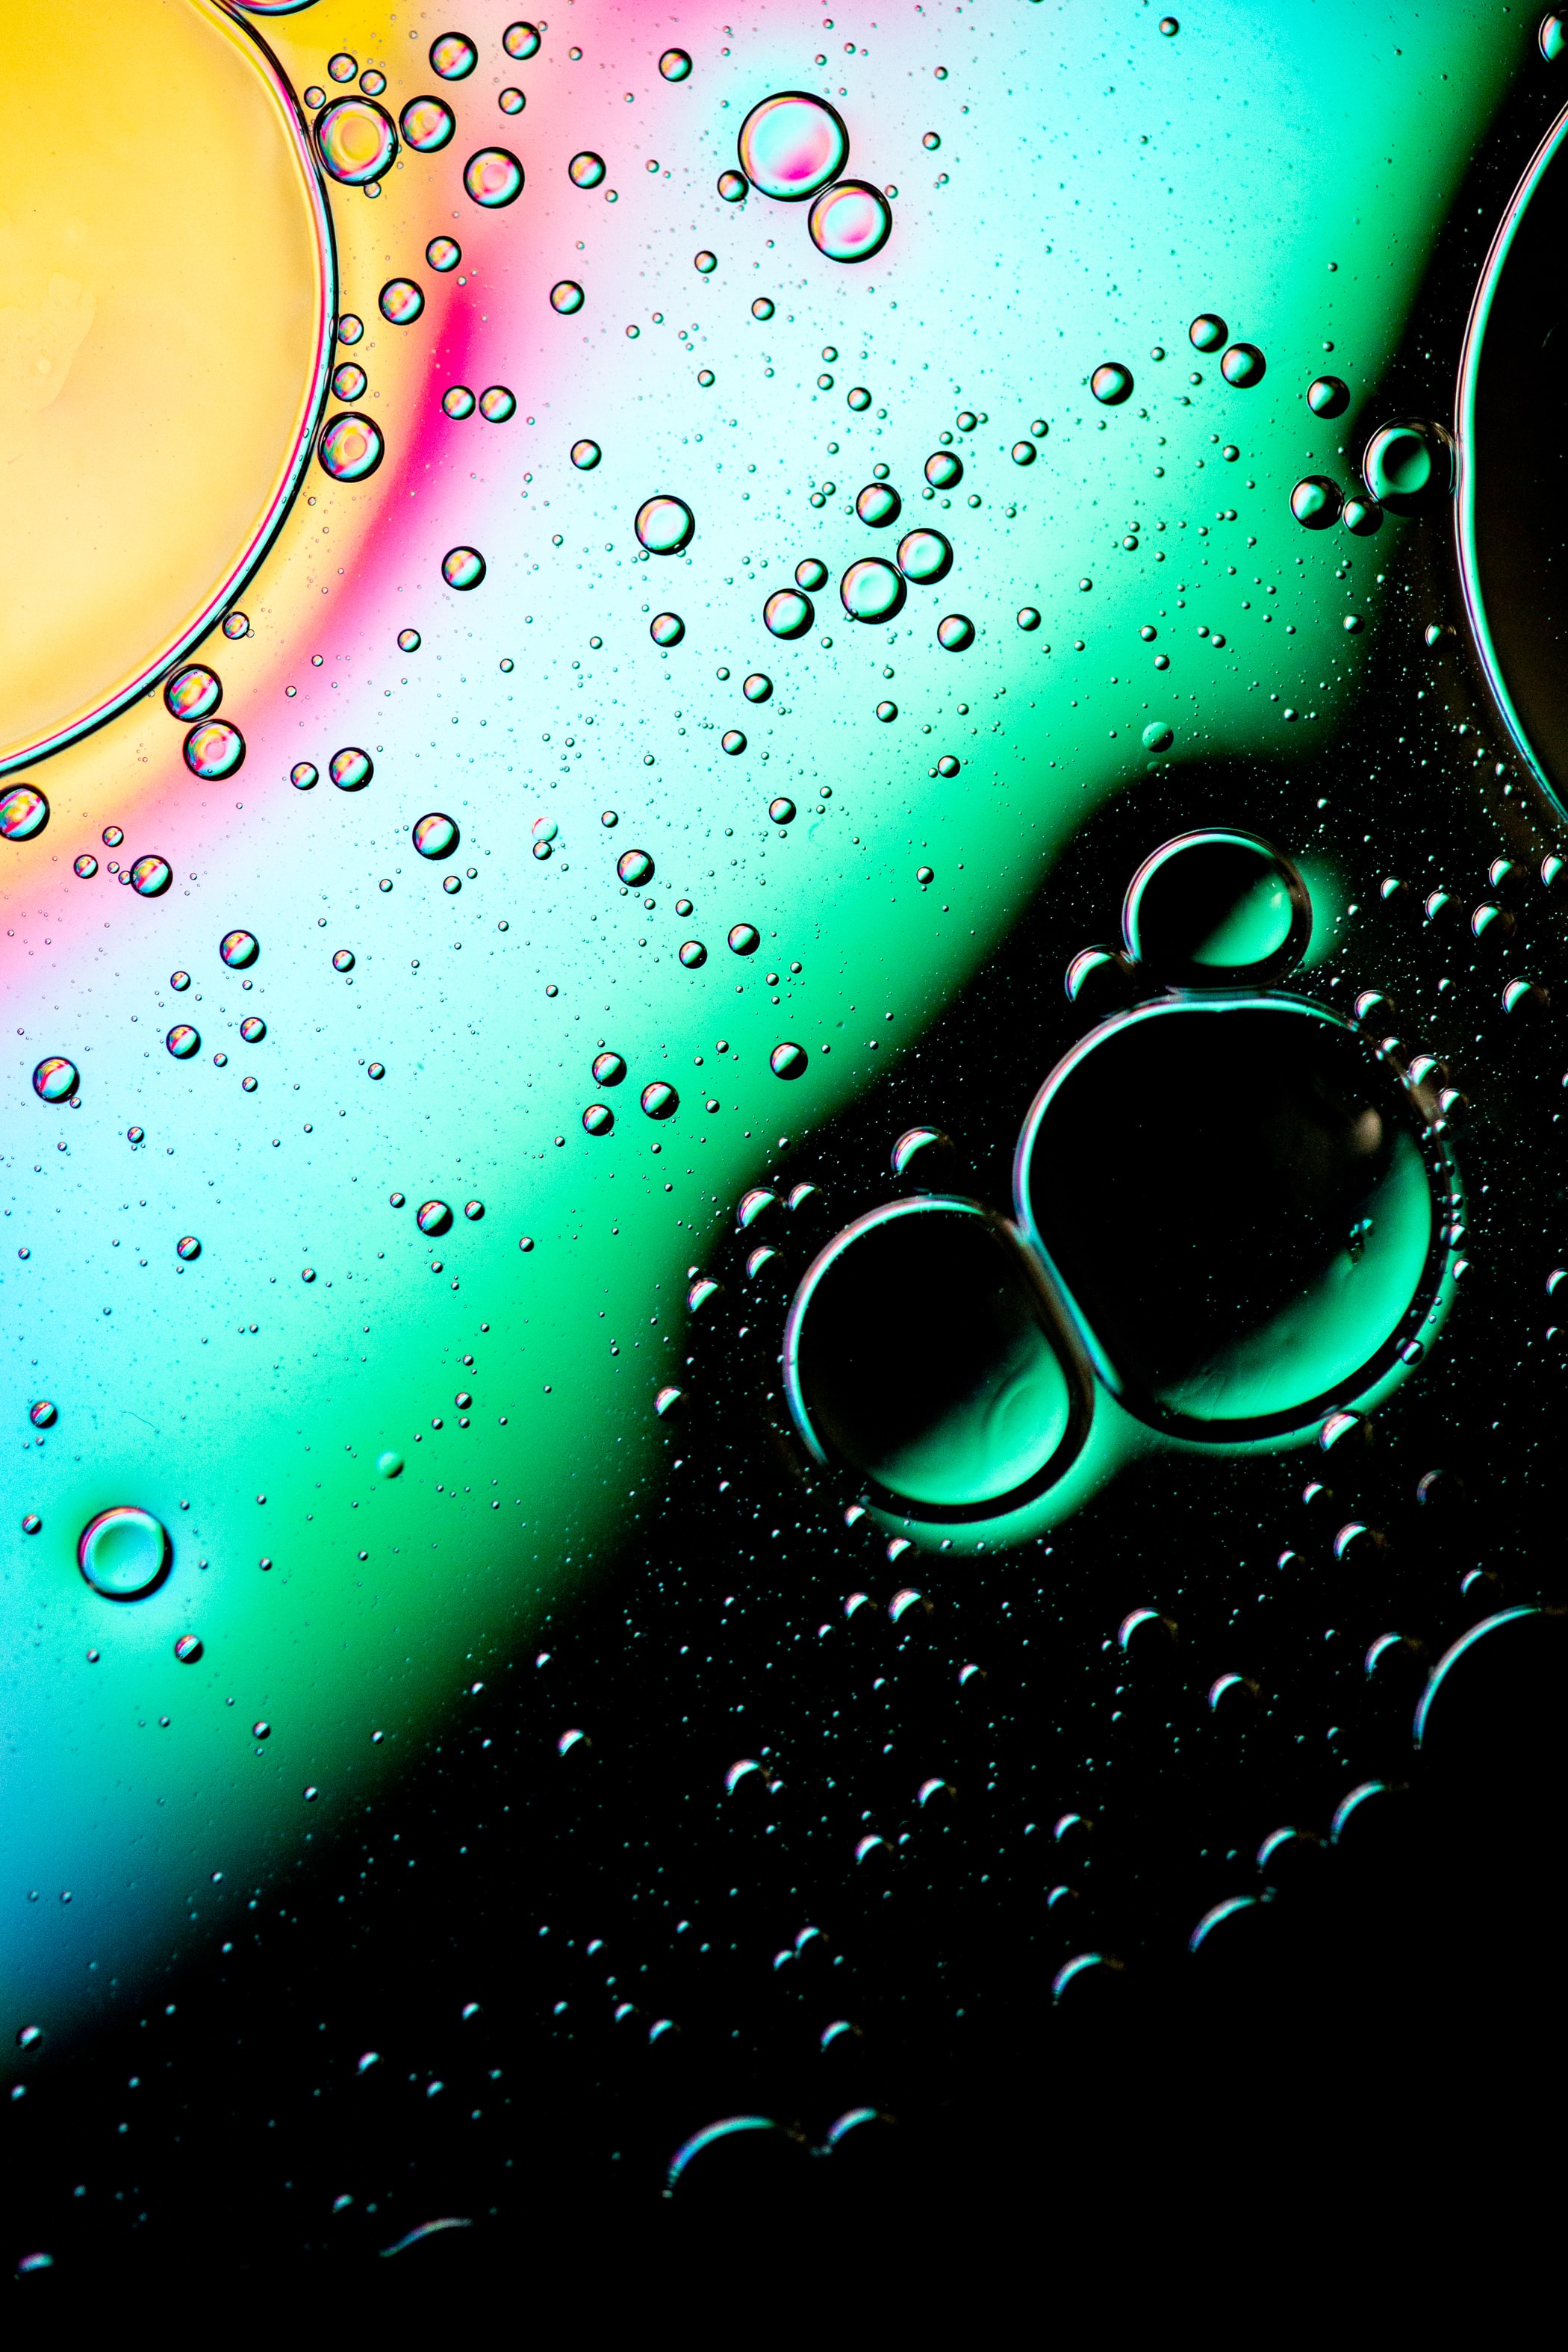 Windows Backgrounds multicolored, abstract, water, bubbles, drops, motley, gradient